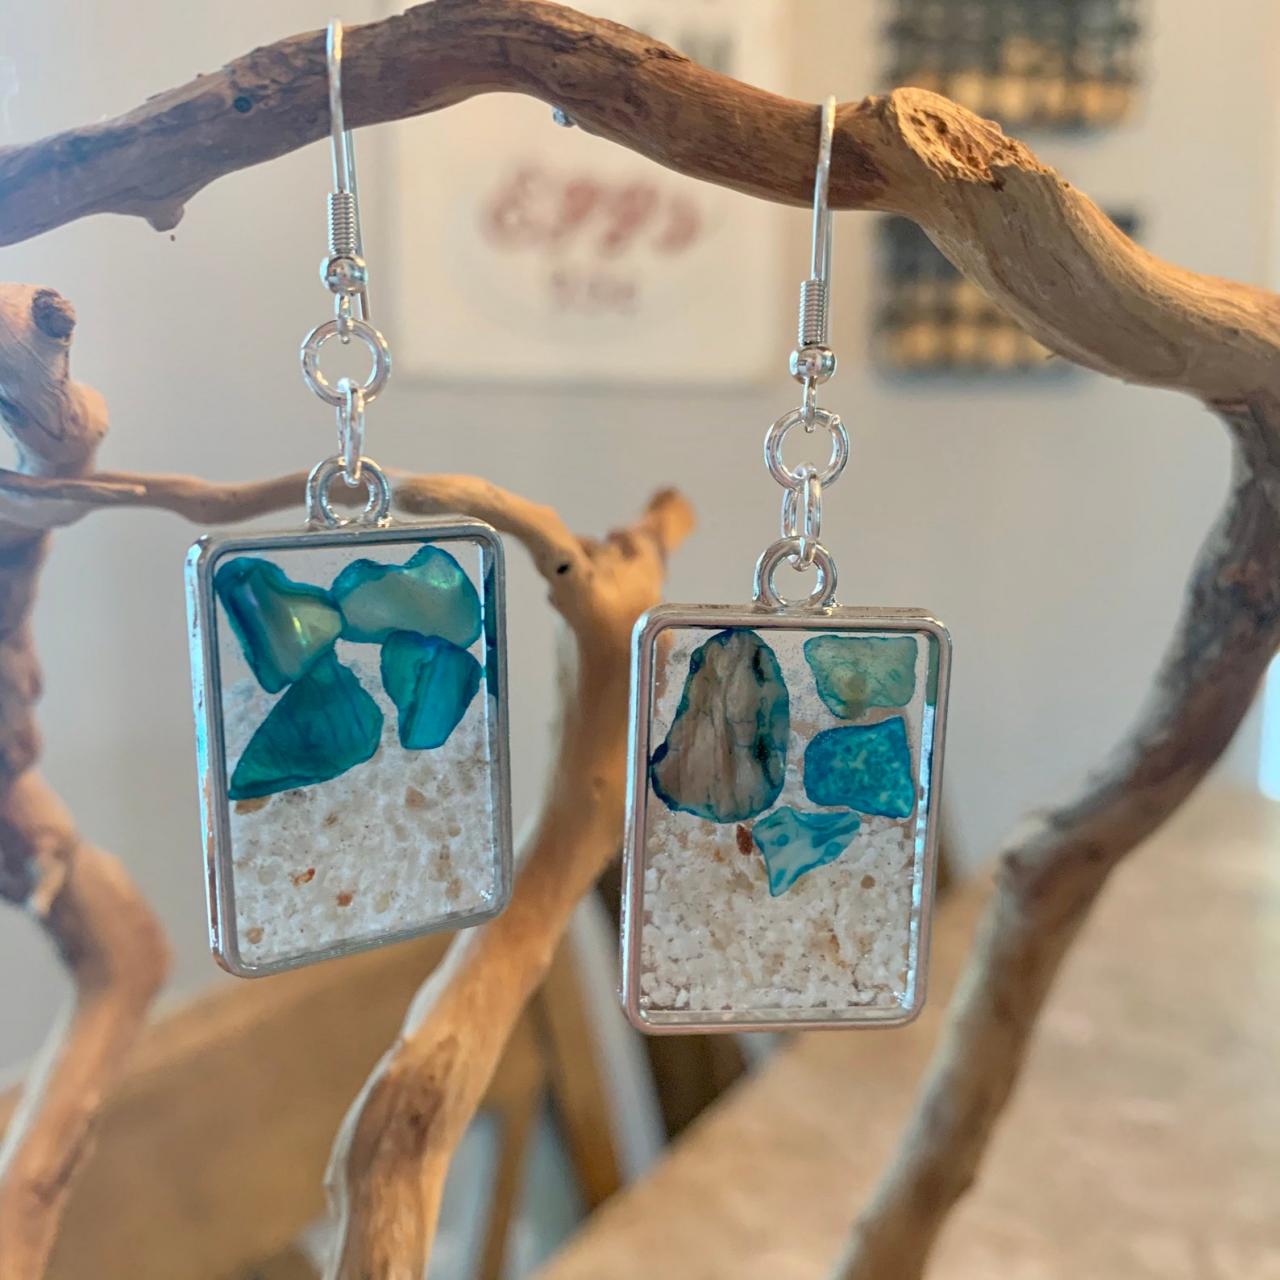 Crushed Shell Resin Earrings,shells And Sand,beach Jewelry, Jewelry For Women,summer Earrings,wave Earrings,nature,natural Jewelry,boho, 1